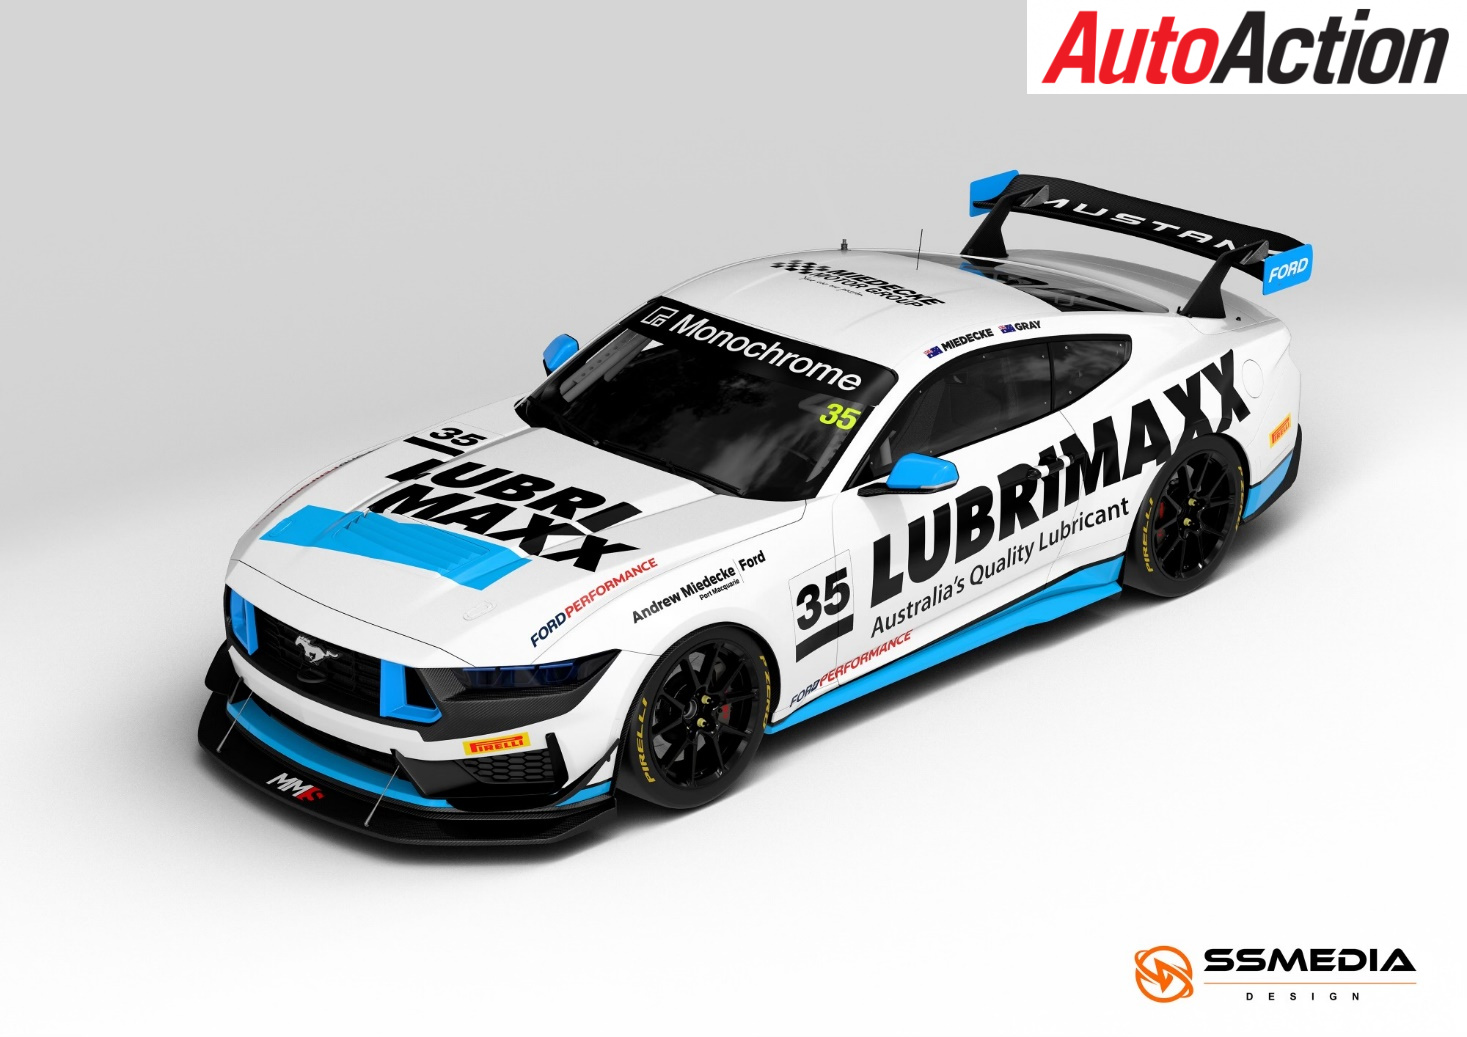 Ford Mustang GT4 set for Aussie debut - Auto Action